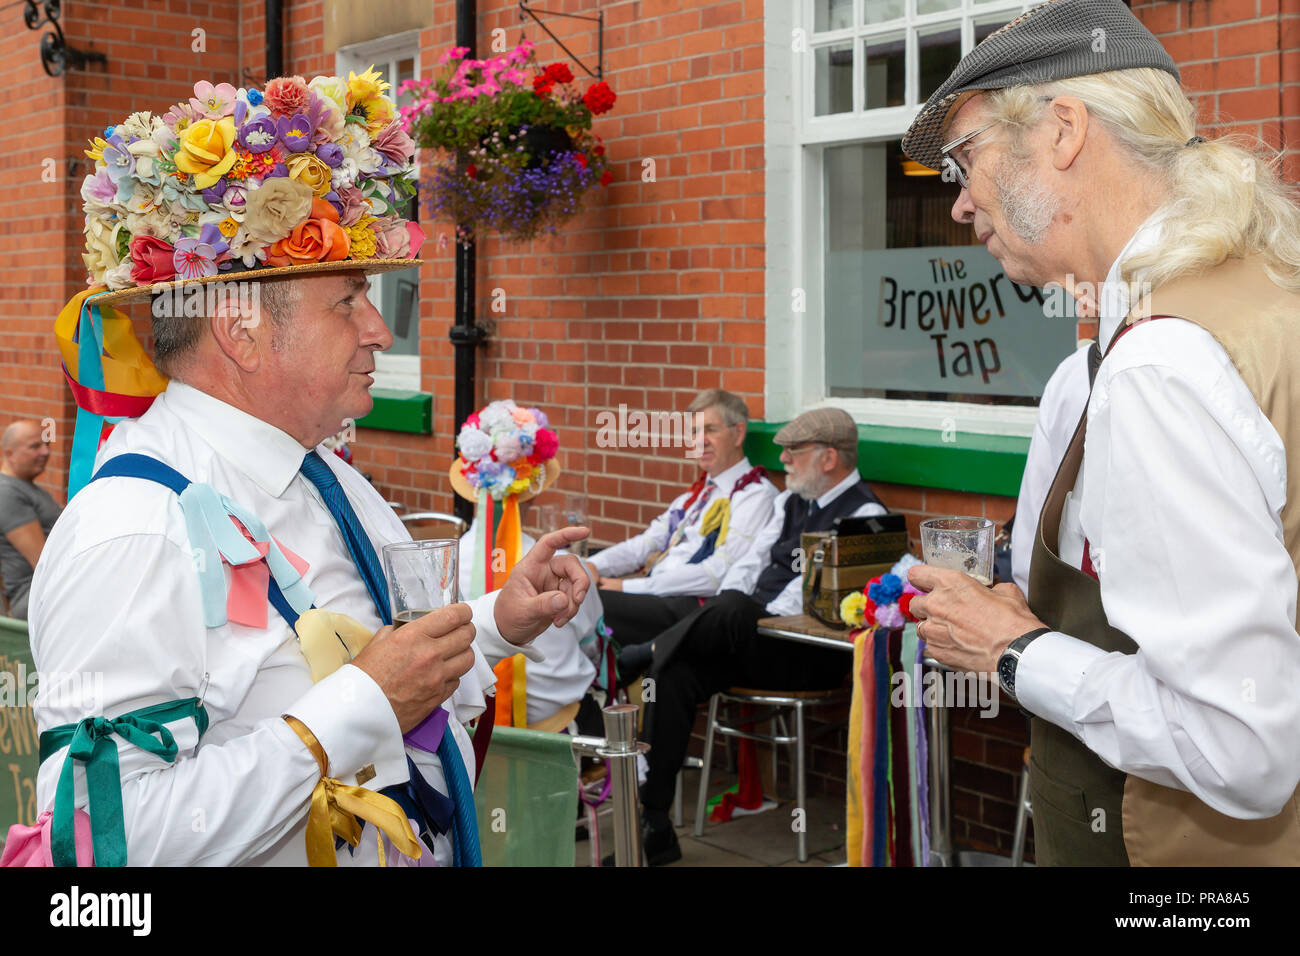 Sunday 12 August, 2018 – The ancient tradition of Lymm Rushbearing has been revived after an absence of two years. Lymm Morris Dancers performed durin Stock Photo